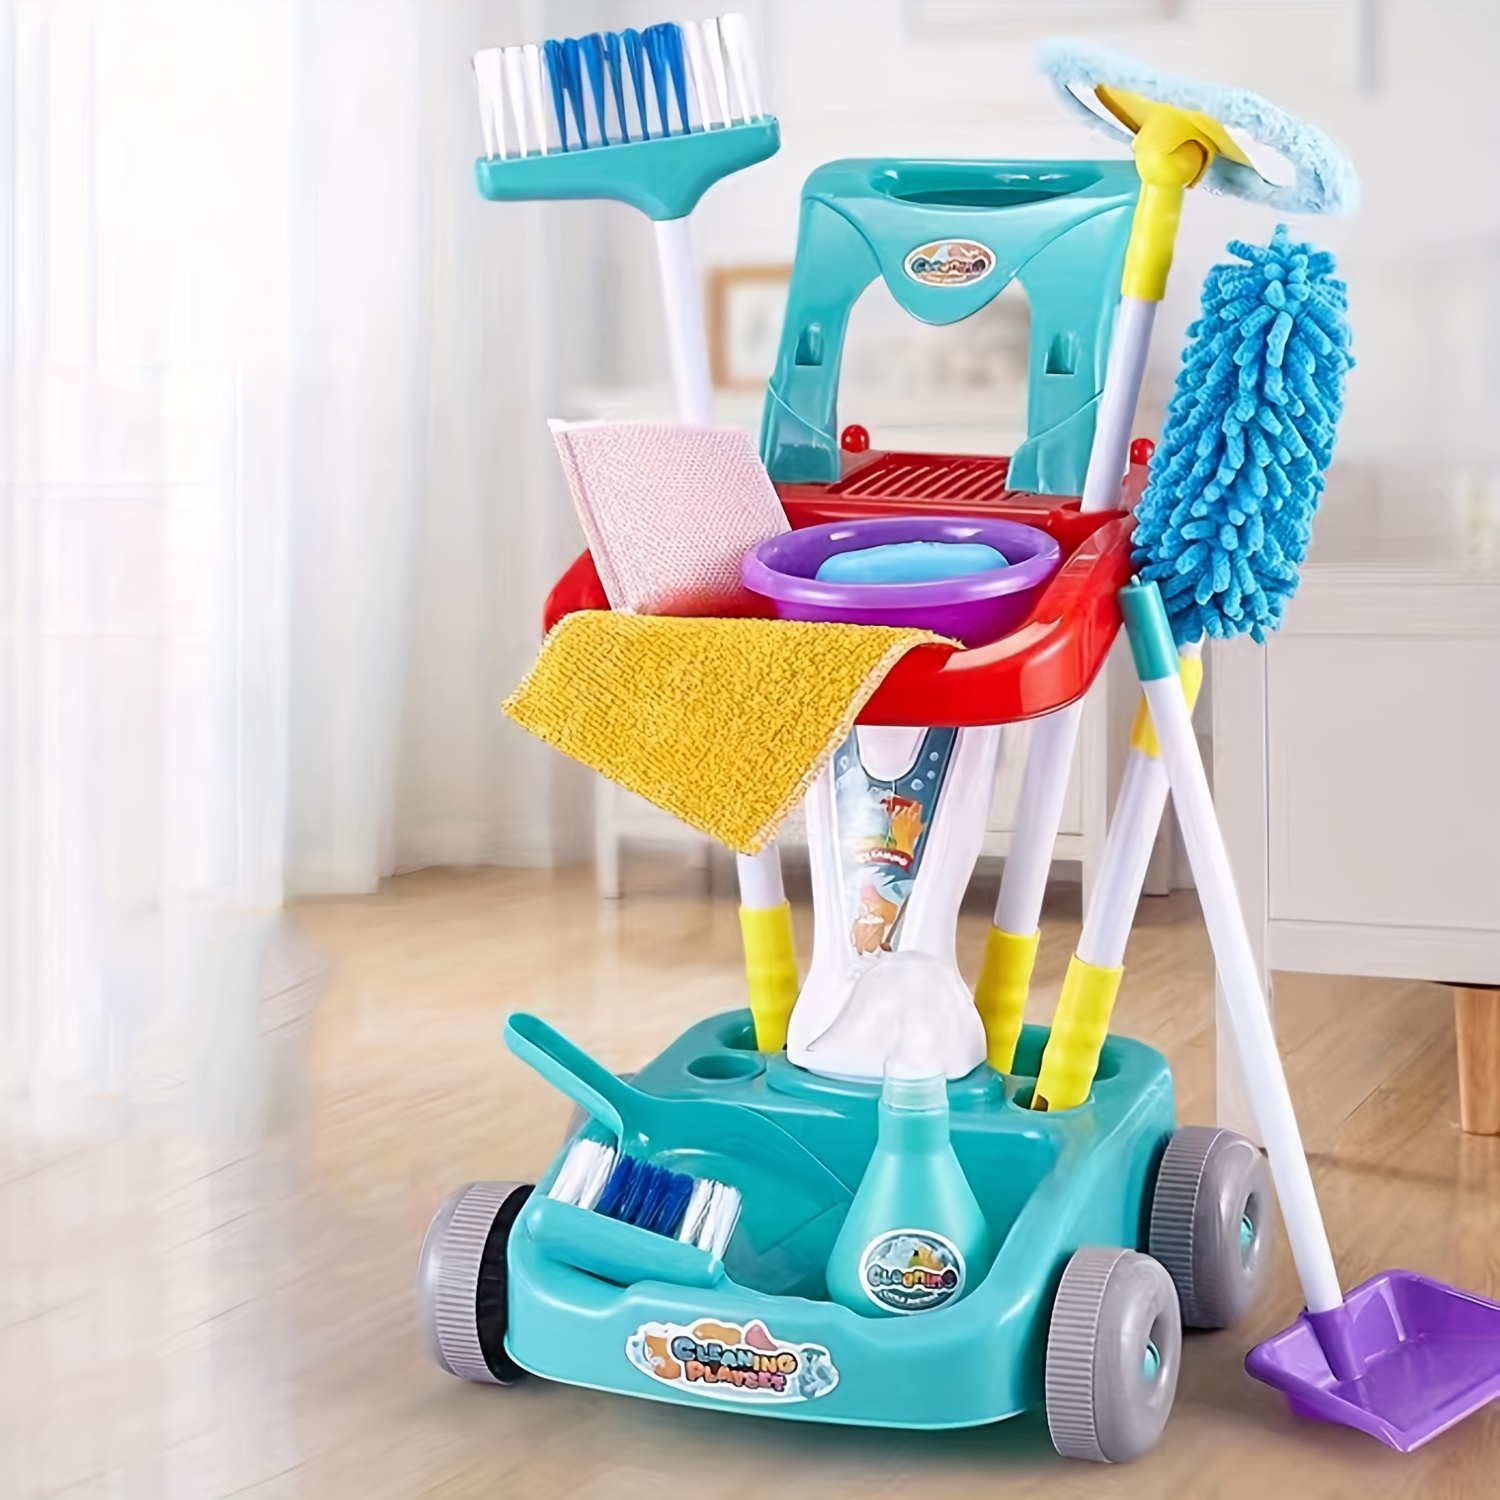 Kids Cleaning Set Housekeeping Pretend Play Kit Cleaning Toys Gift  Simulation Cleaning Tool Cart Including Broom Mop And More - AliExpress